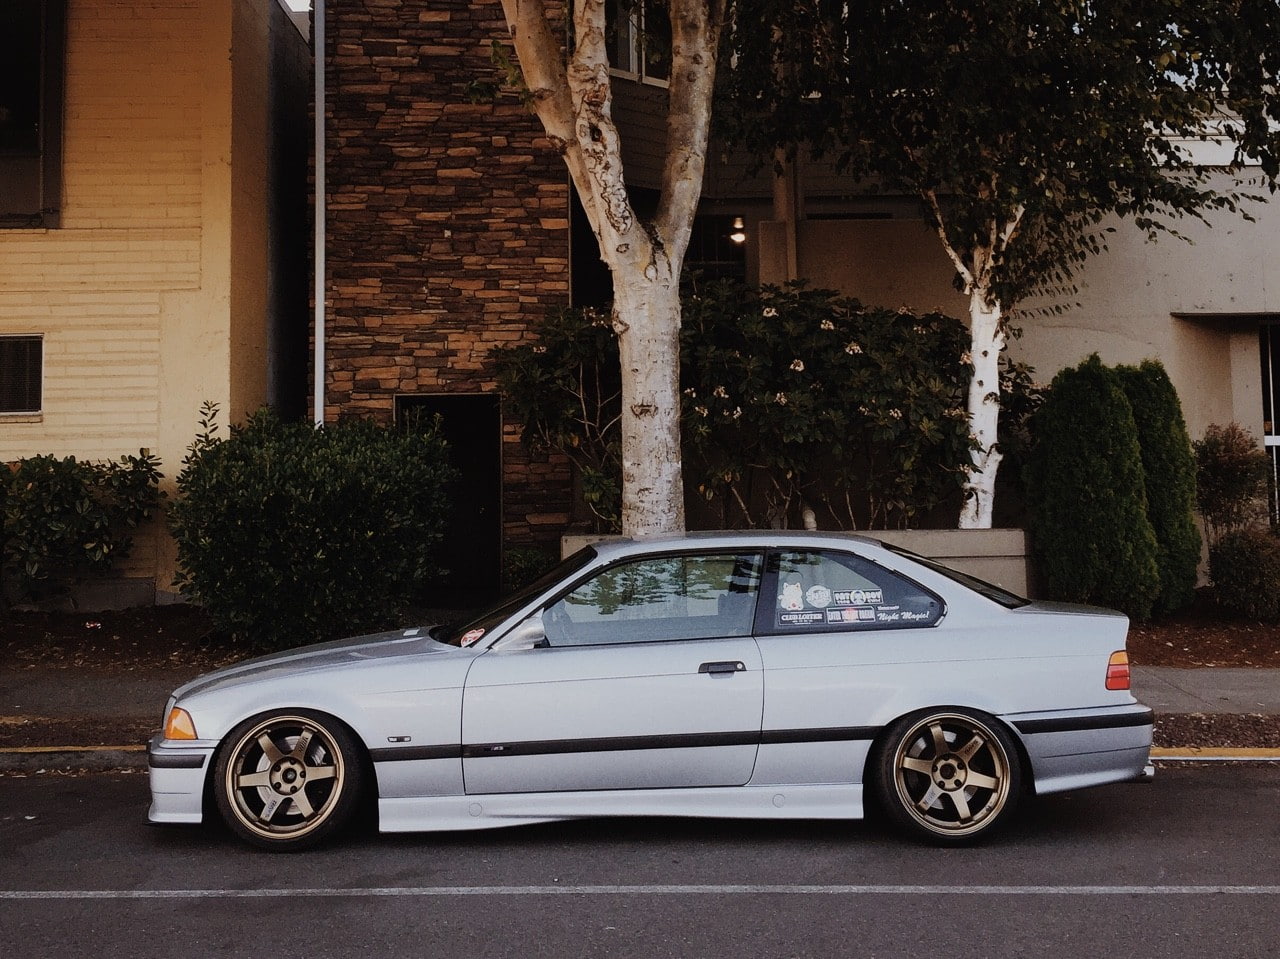 bmw, BMW E36, Bushes, car, German Cars, house, Lowered, Stance